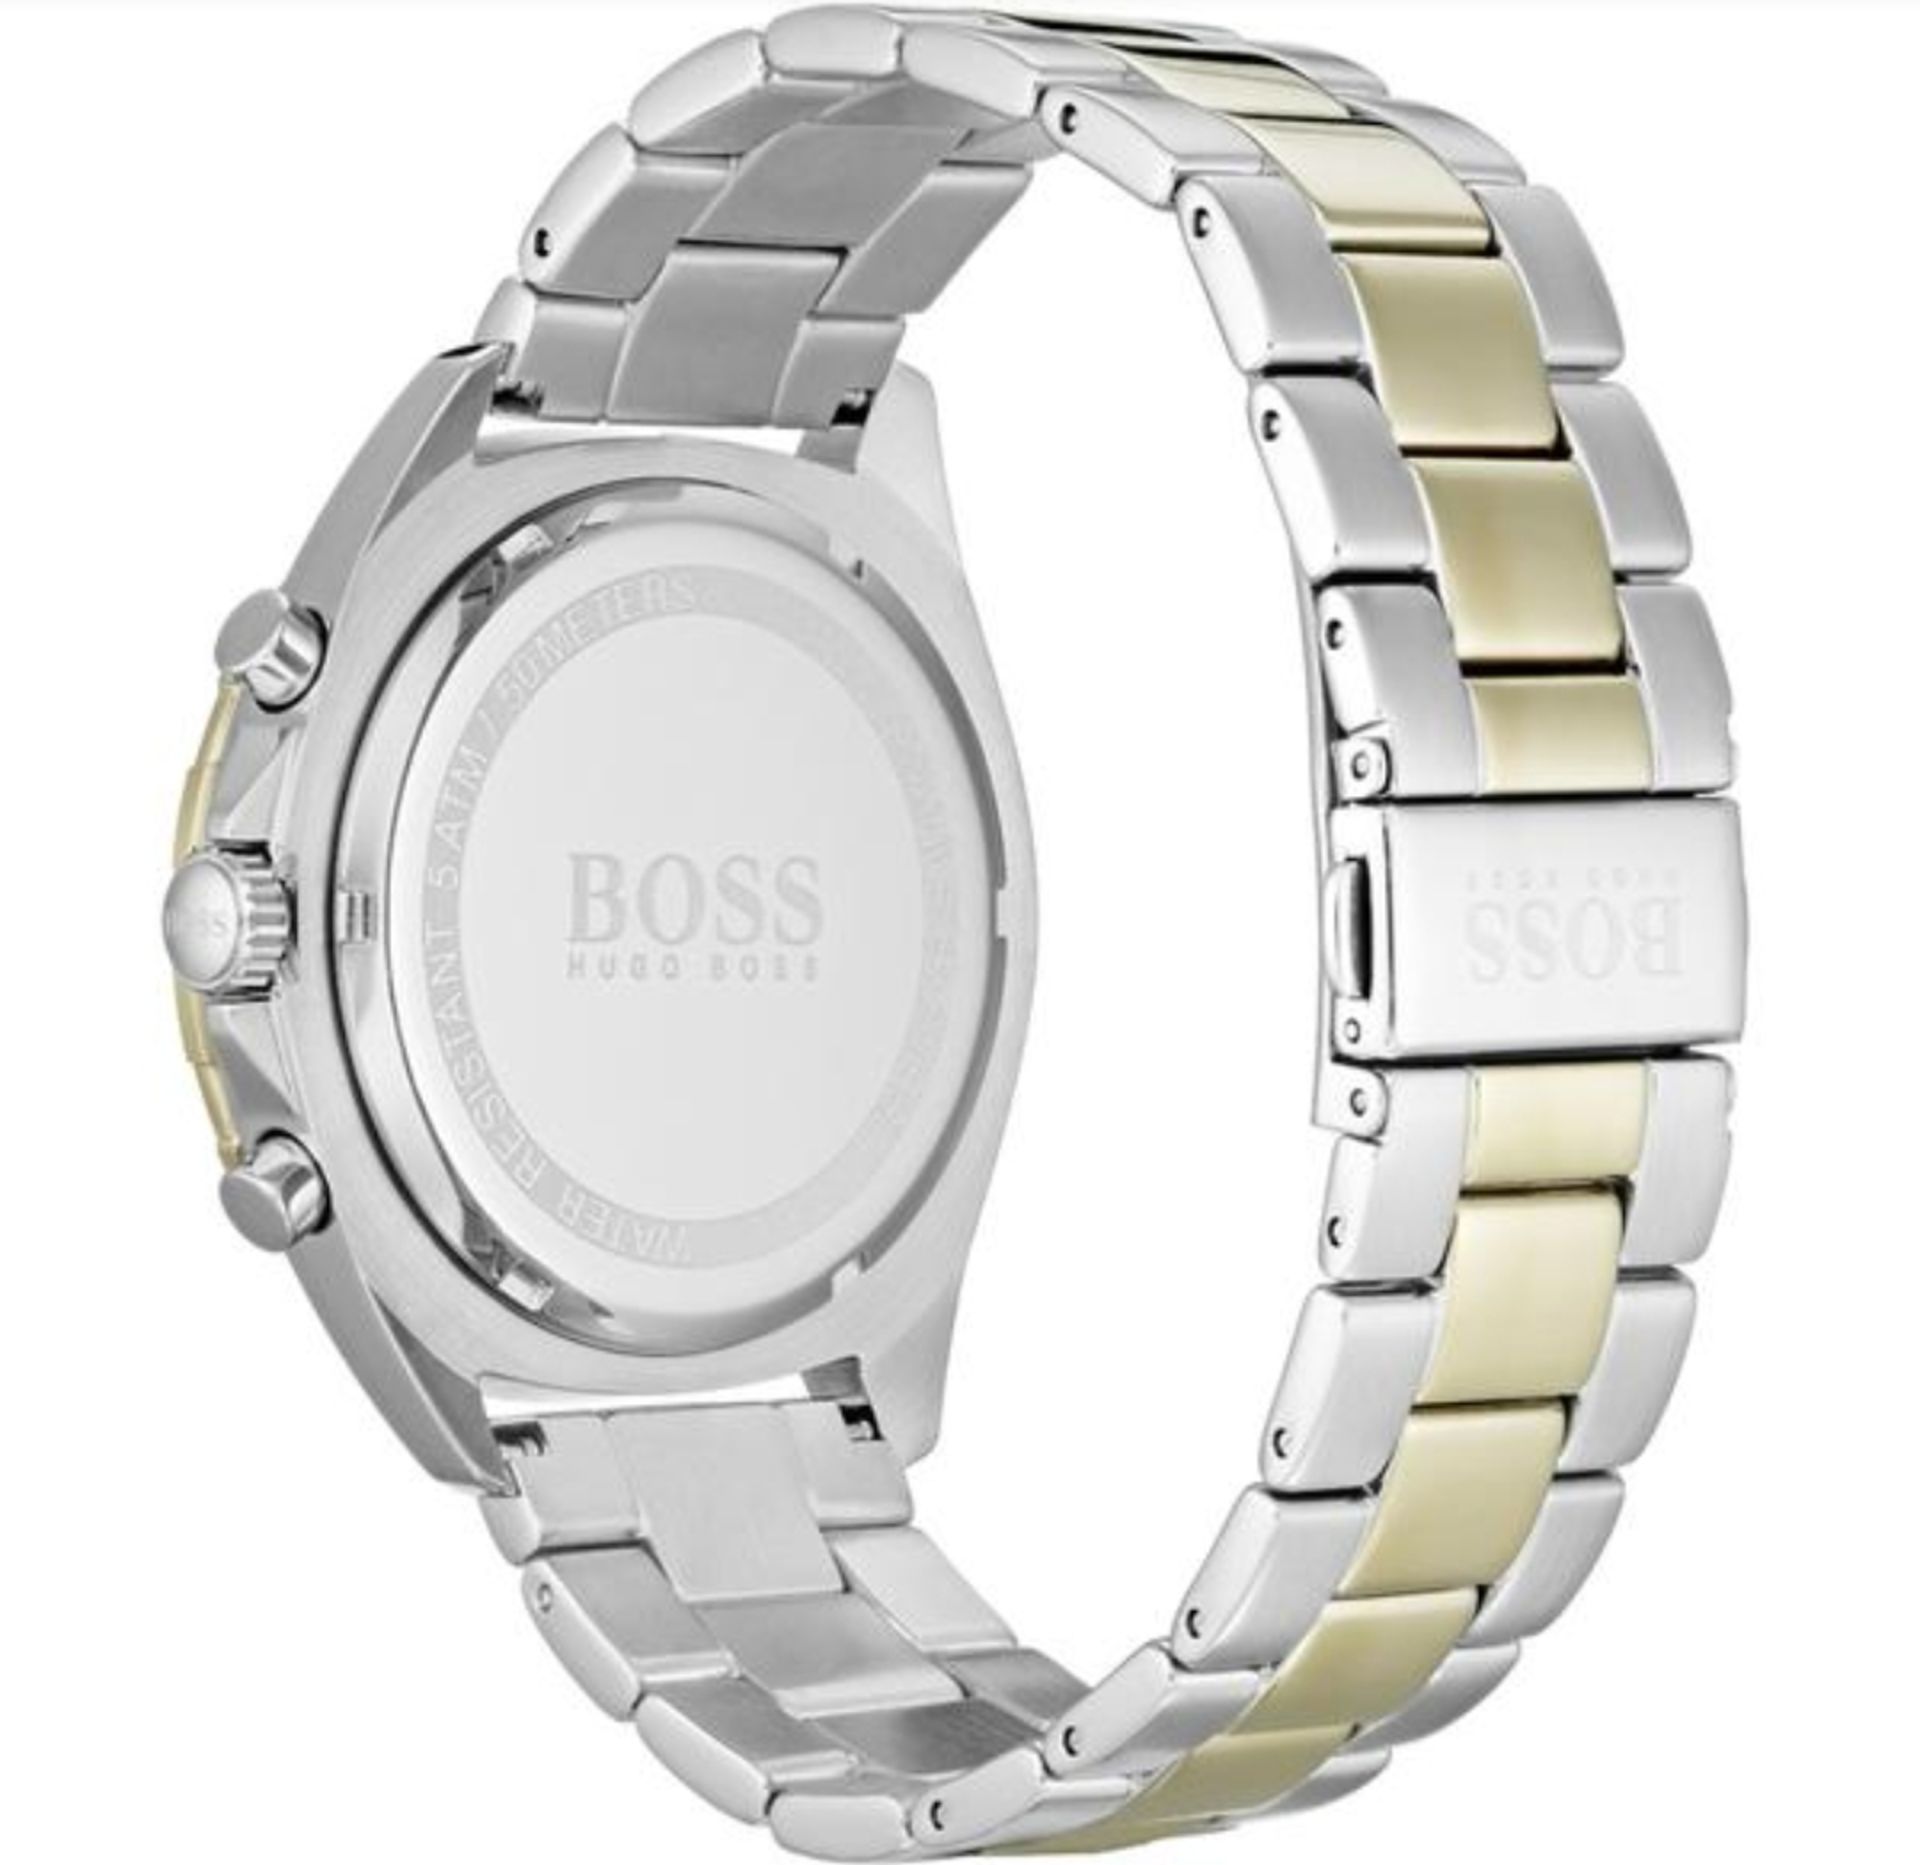 Hugo Boss 1513667 Men's Sport Intensity Two Tone Gold & Silver Chronograph Watch - Image 3 of 5